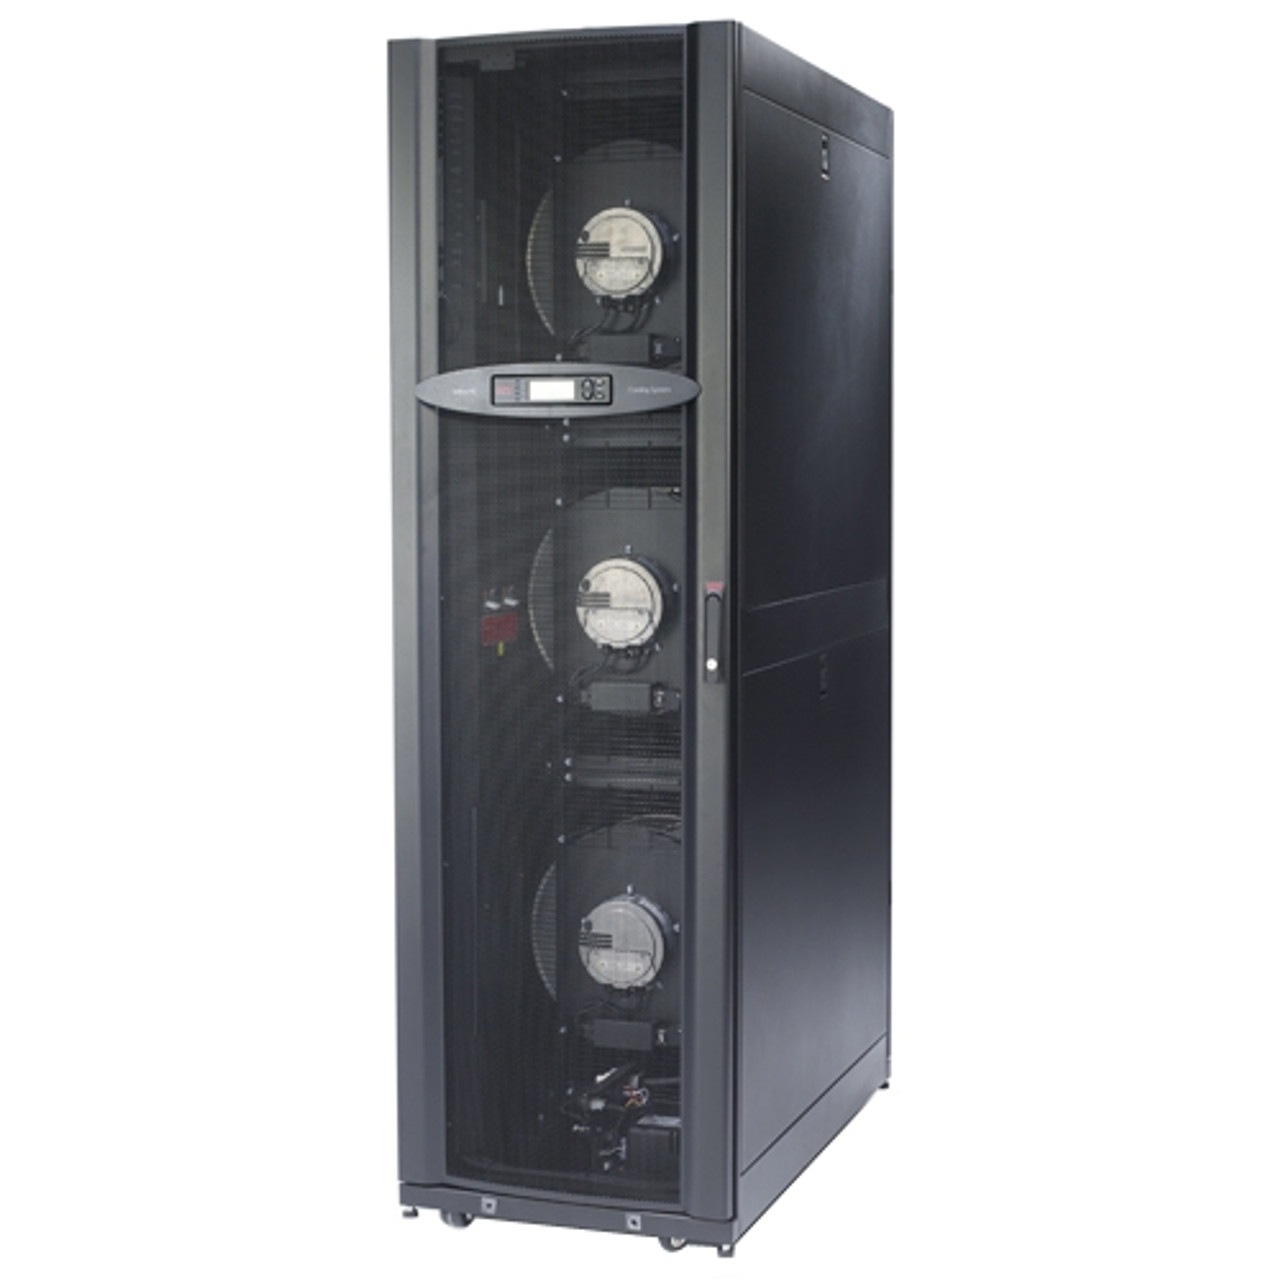 ACRC500 APC Inrow Rc Airflow Cooling System 6900 Cfm Tower Black (Refurbished)